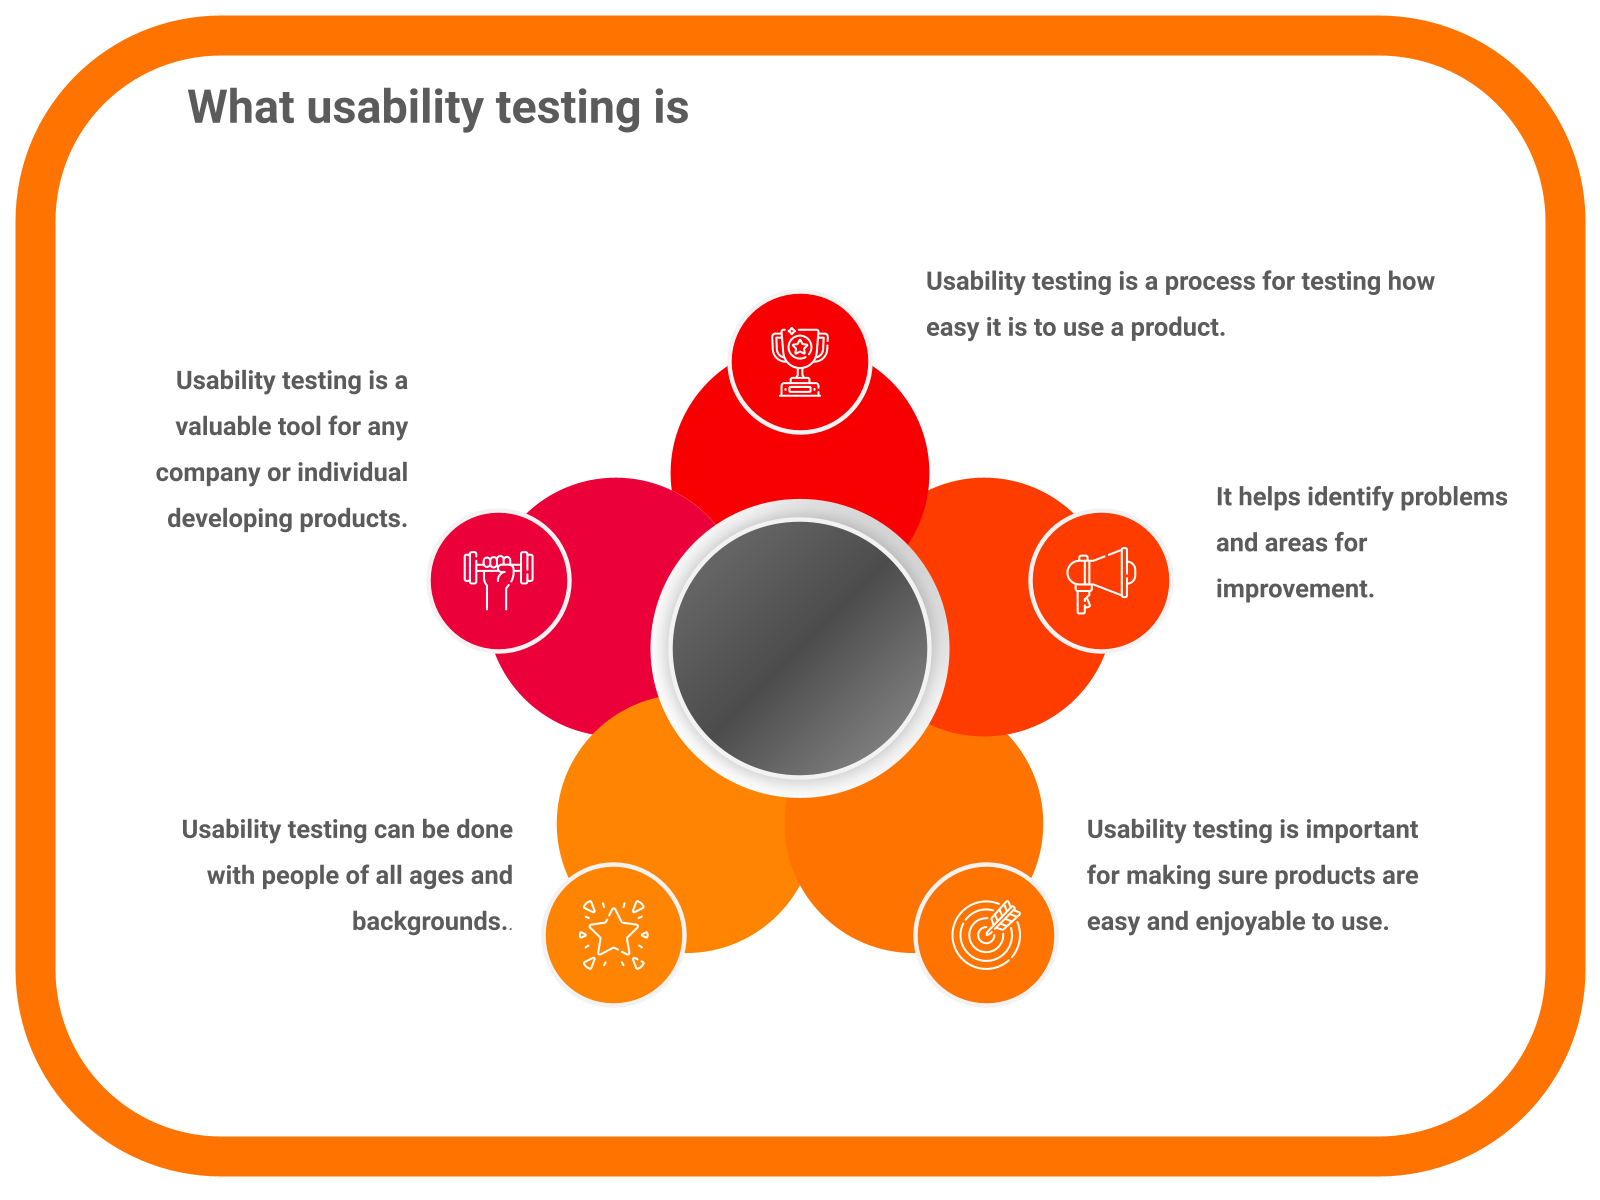 What usability testing is